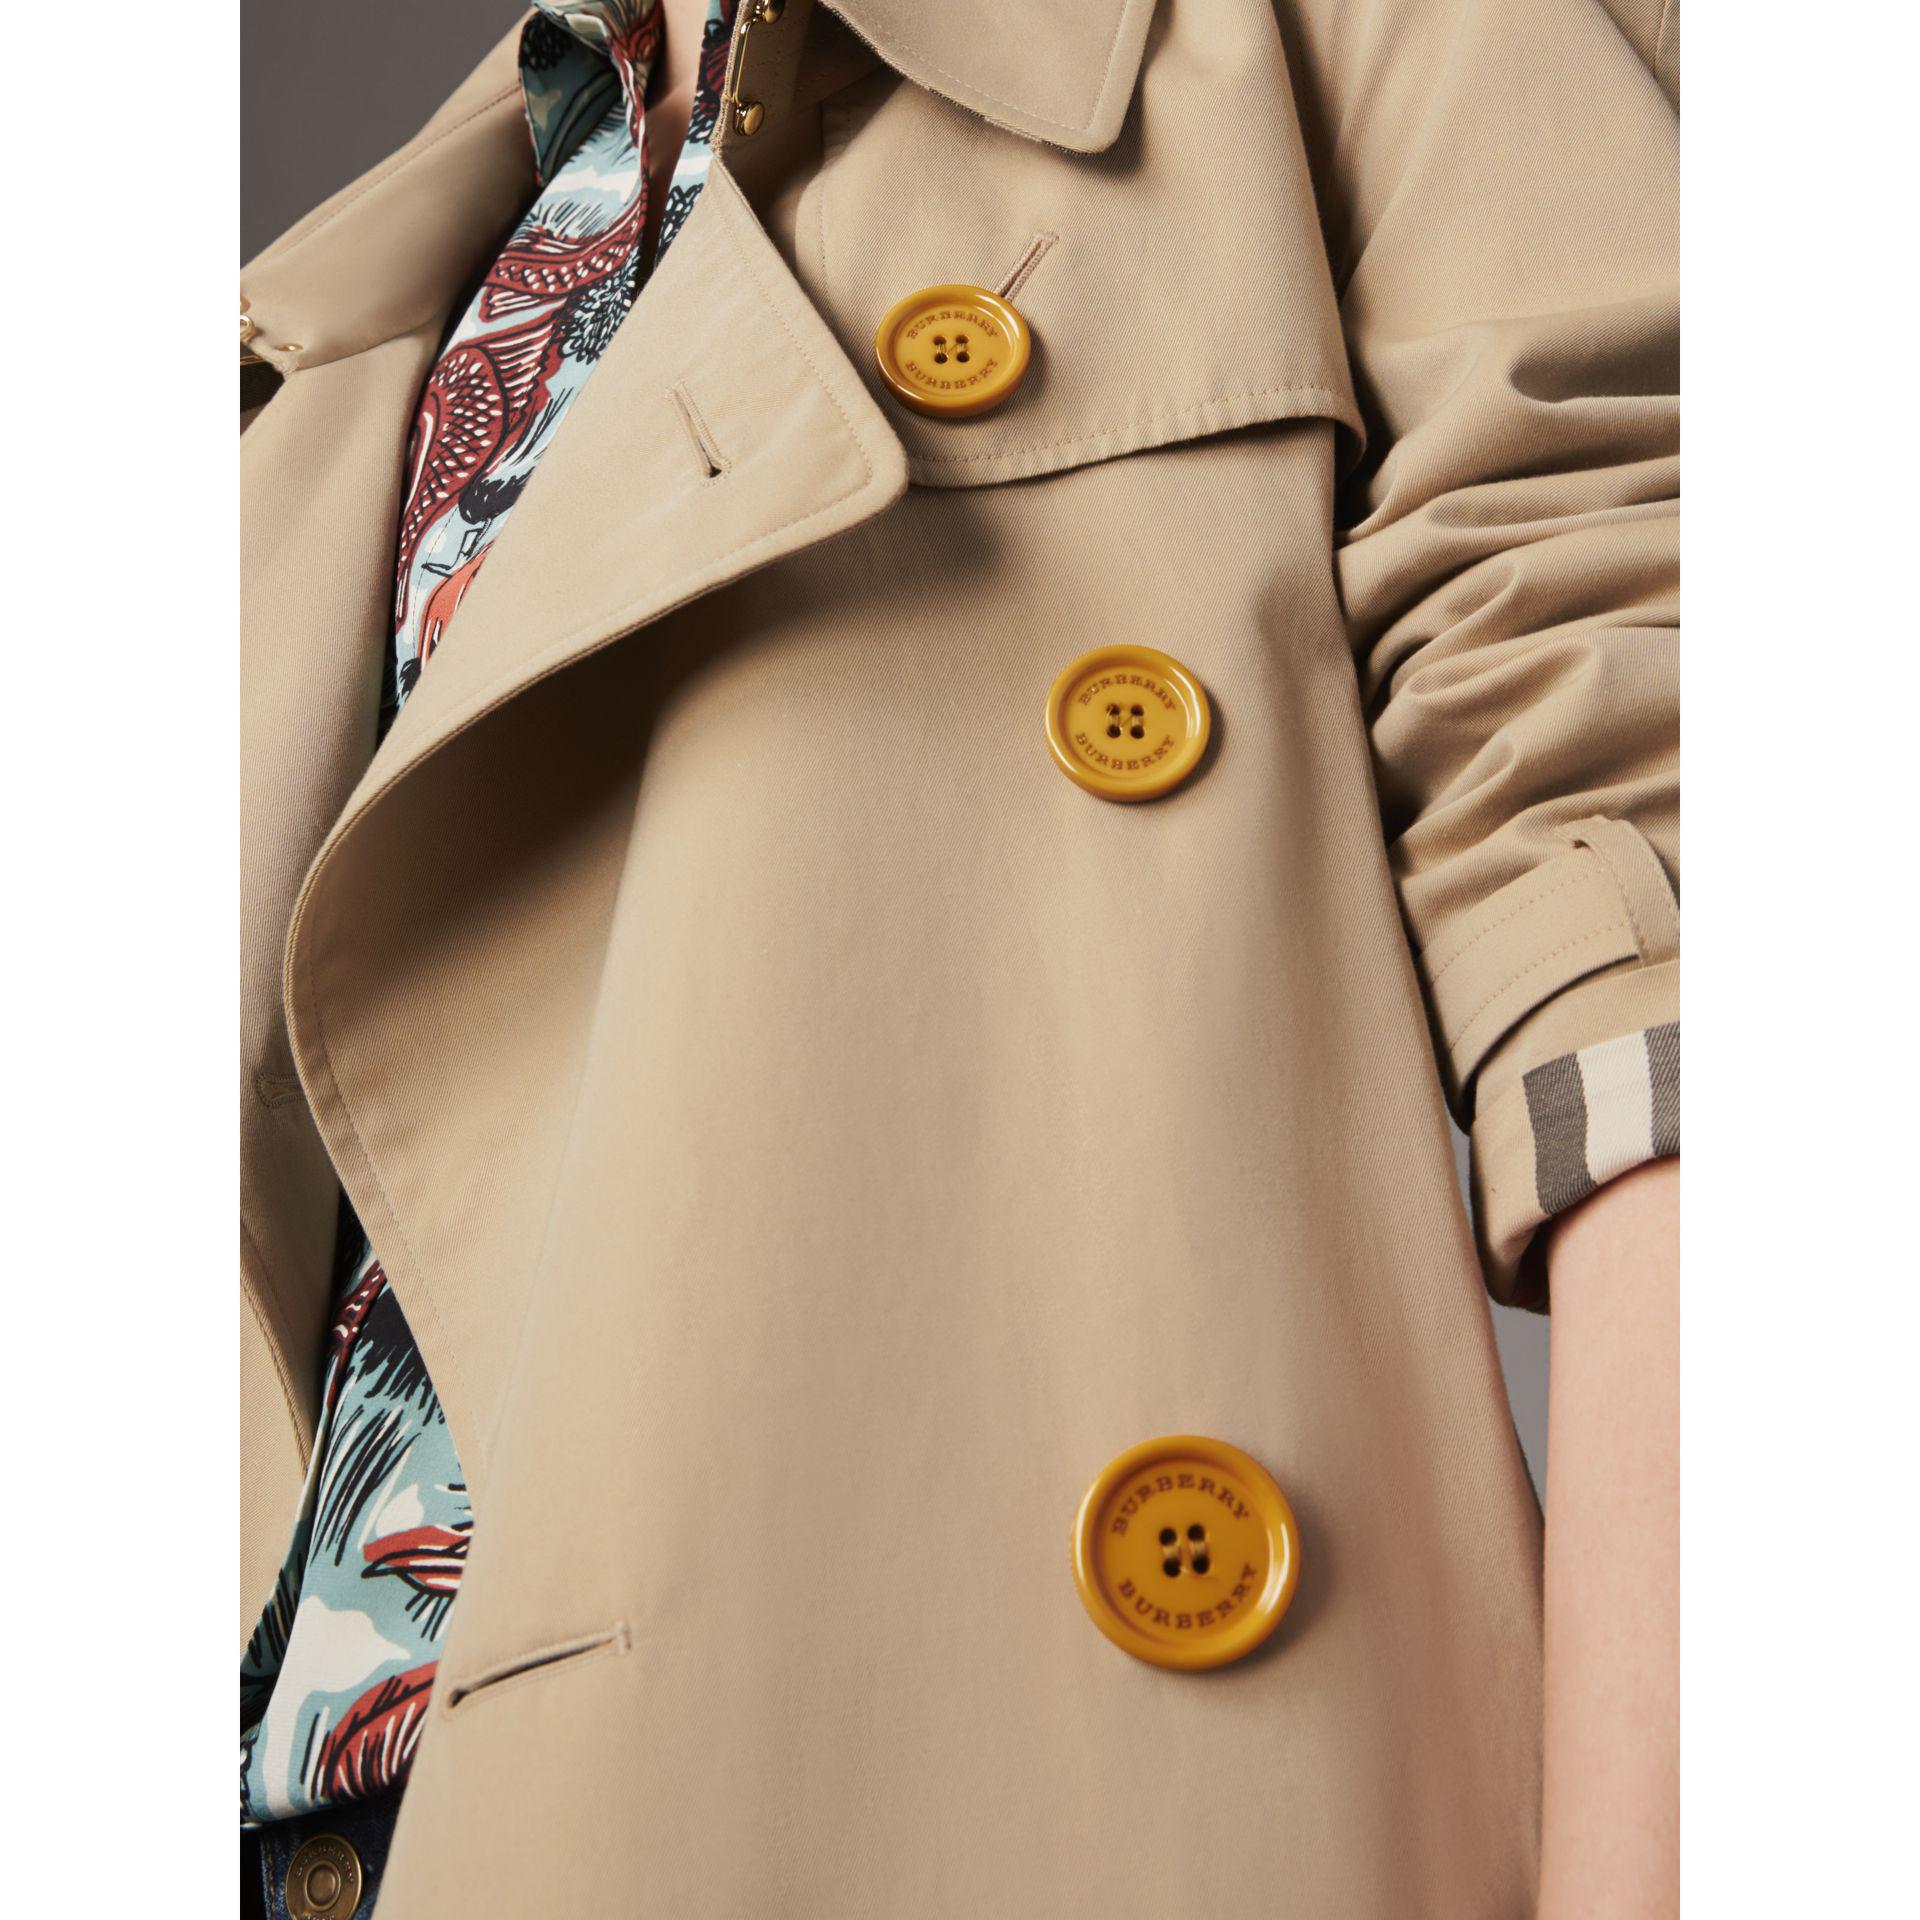 burberry trench buttons,www.spinephysiotherapy.com